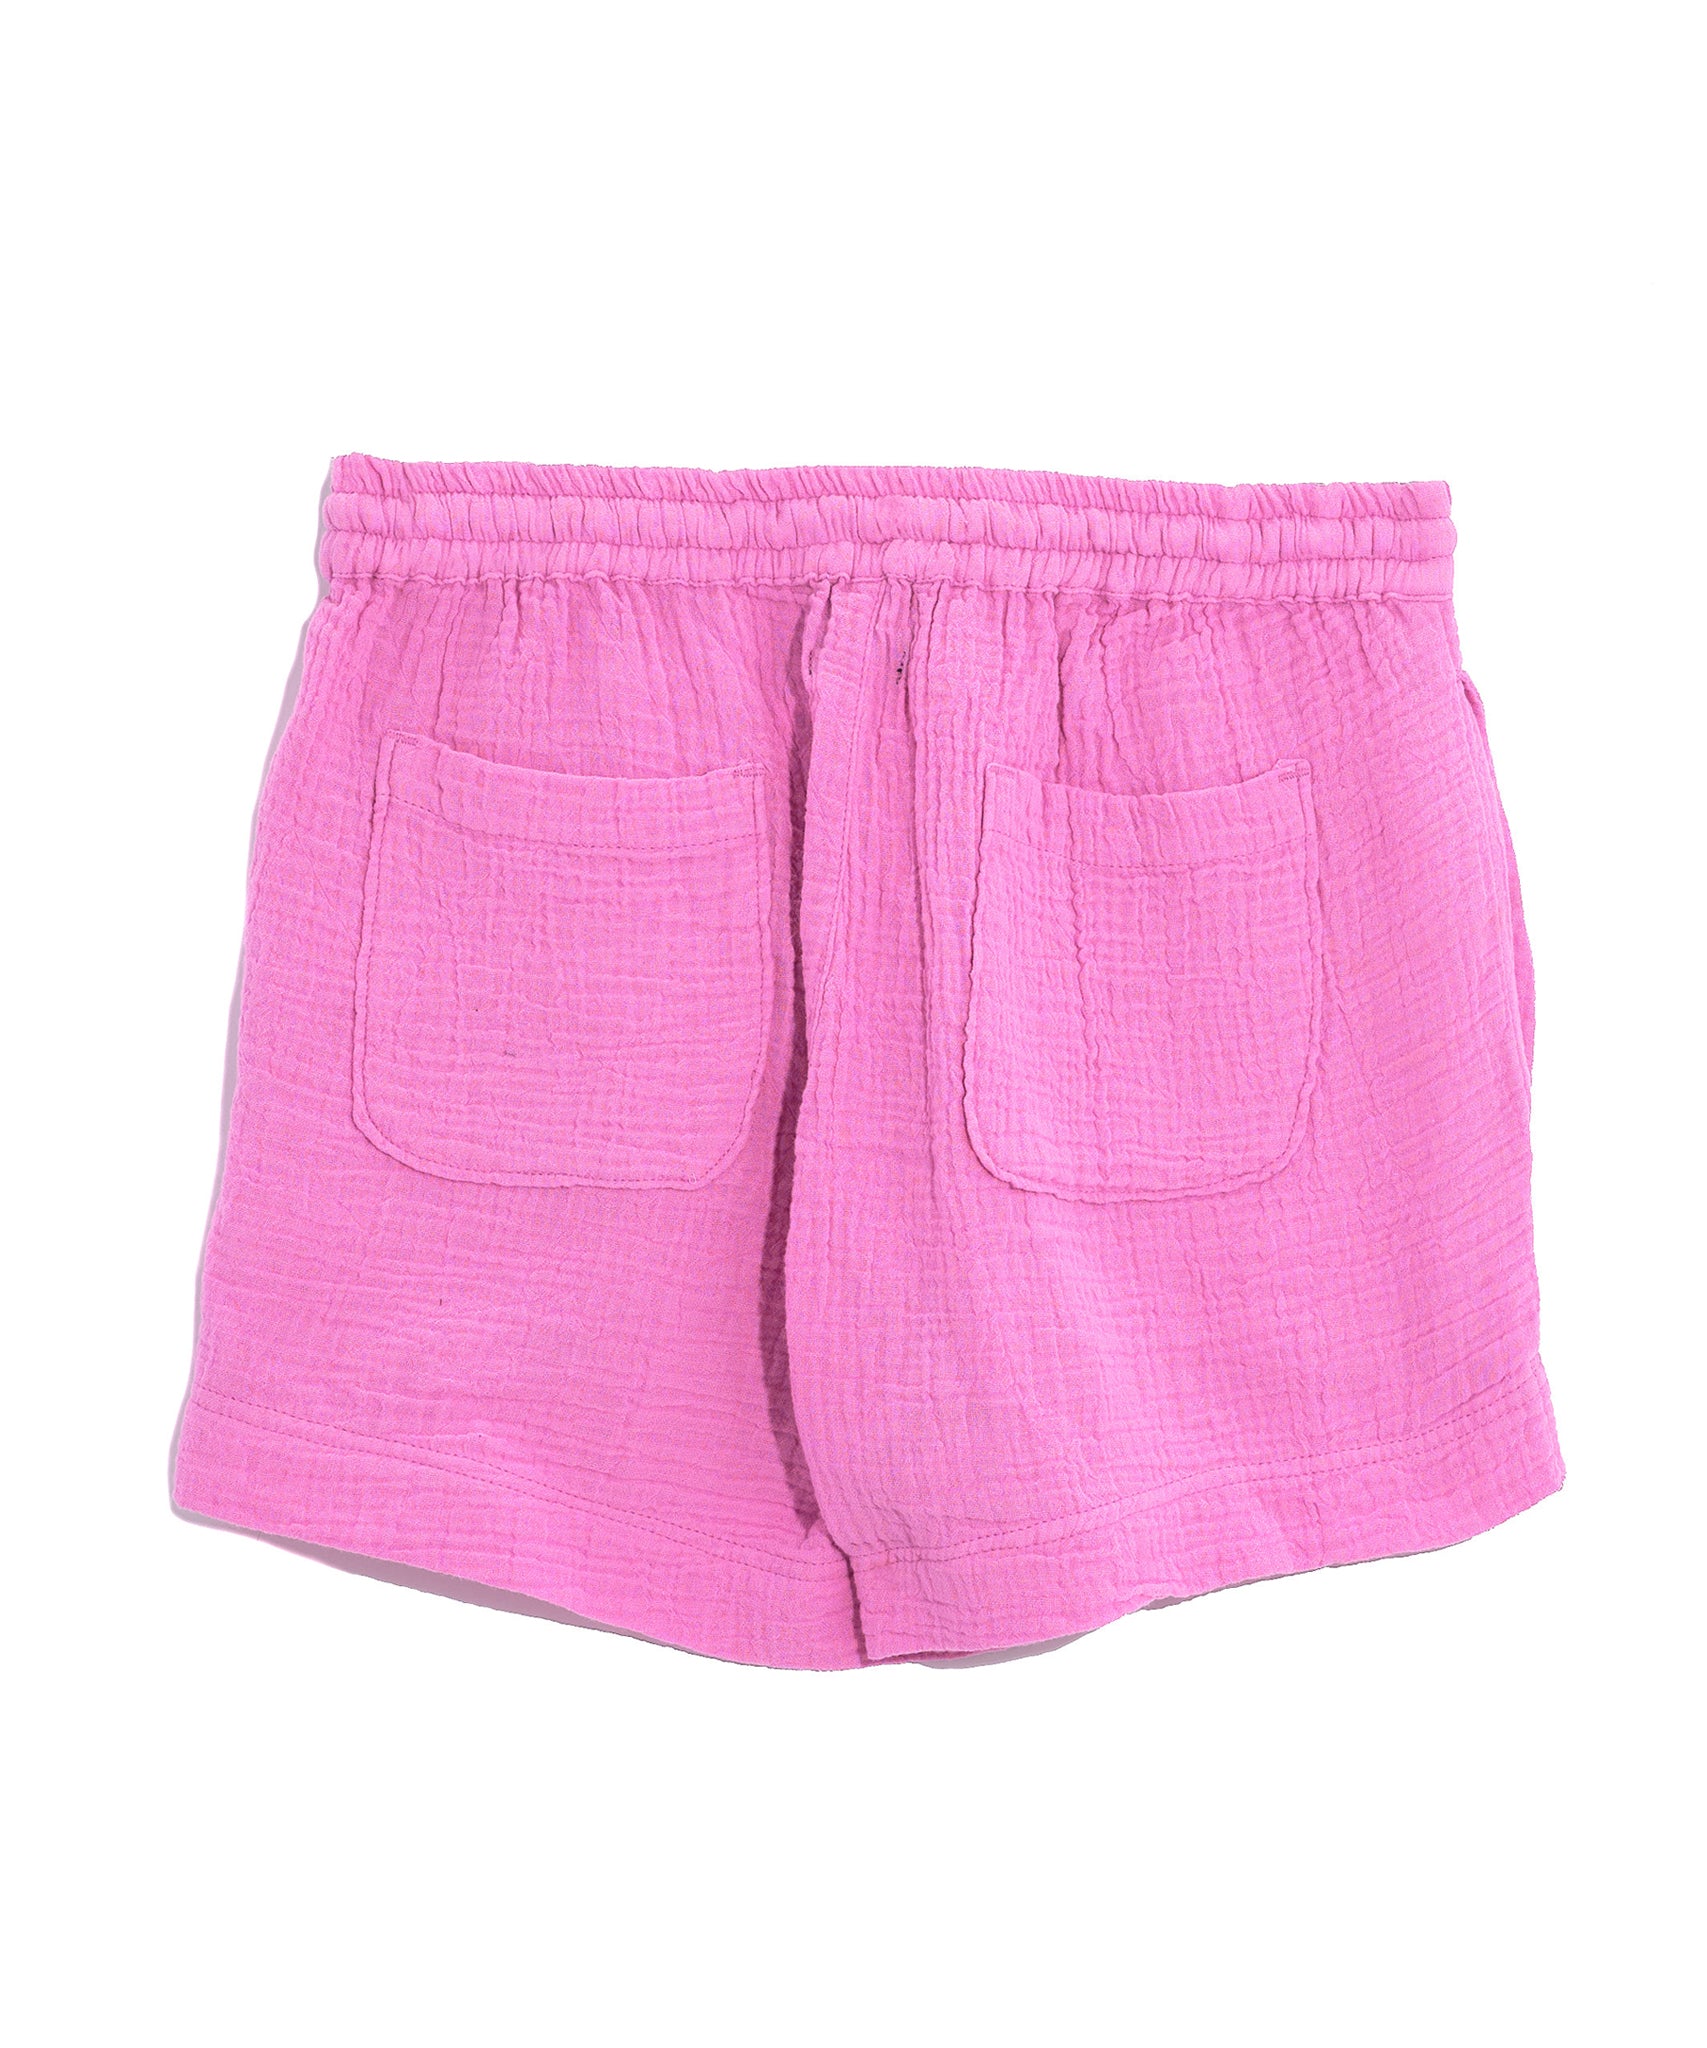 Supersoft Gauze Beach Shorts in color Cyclamen